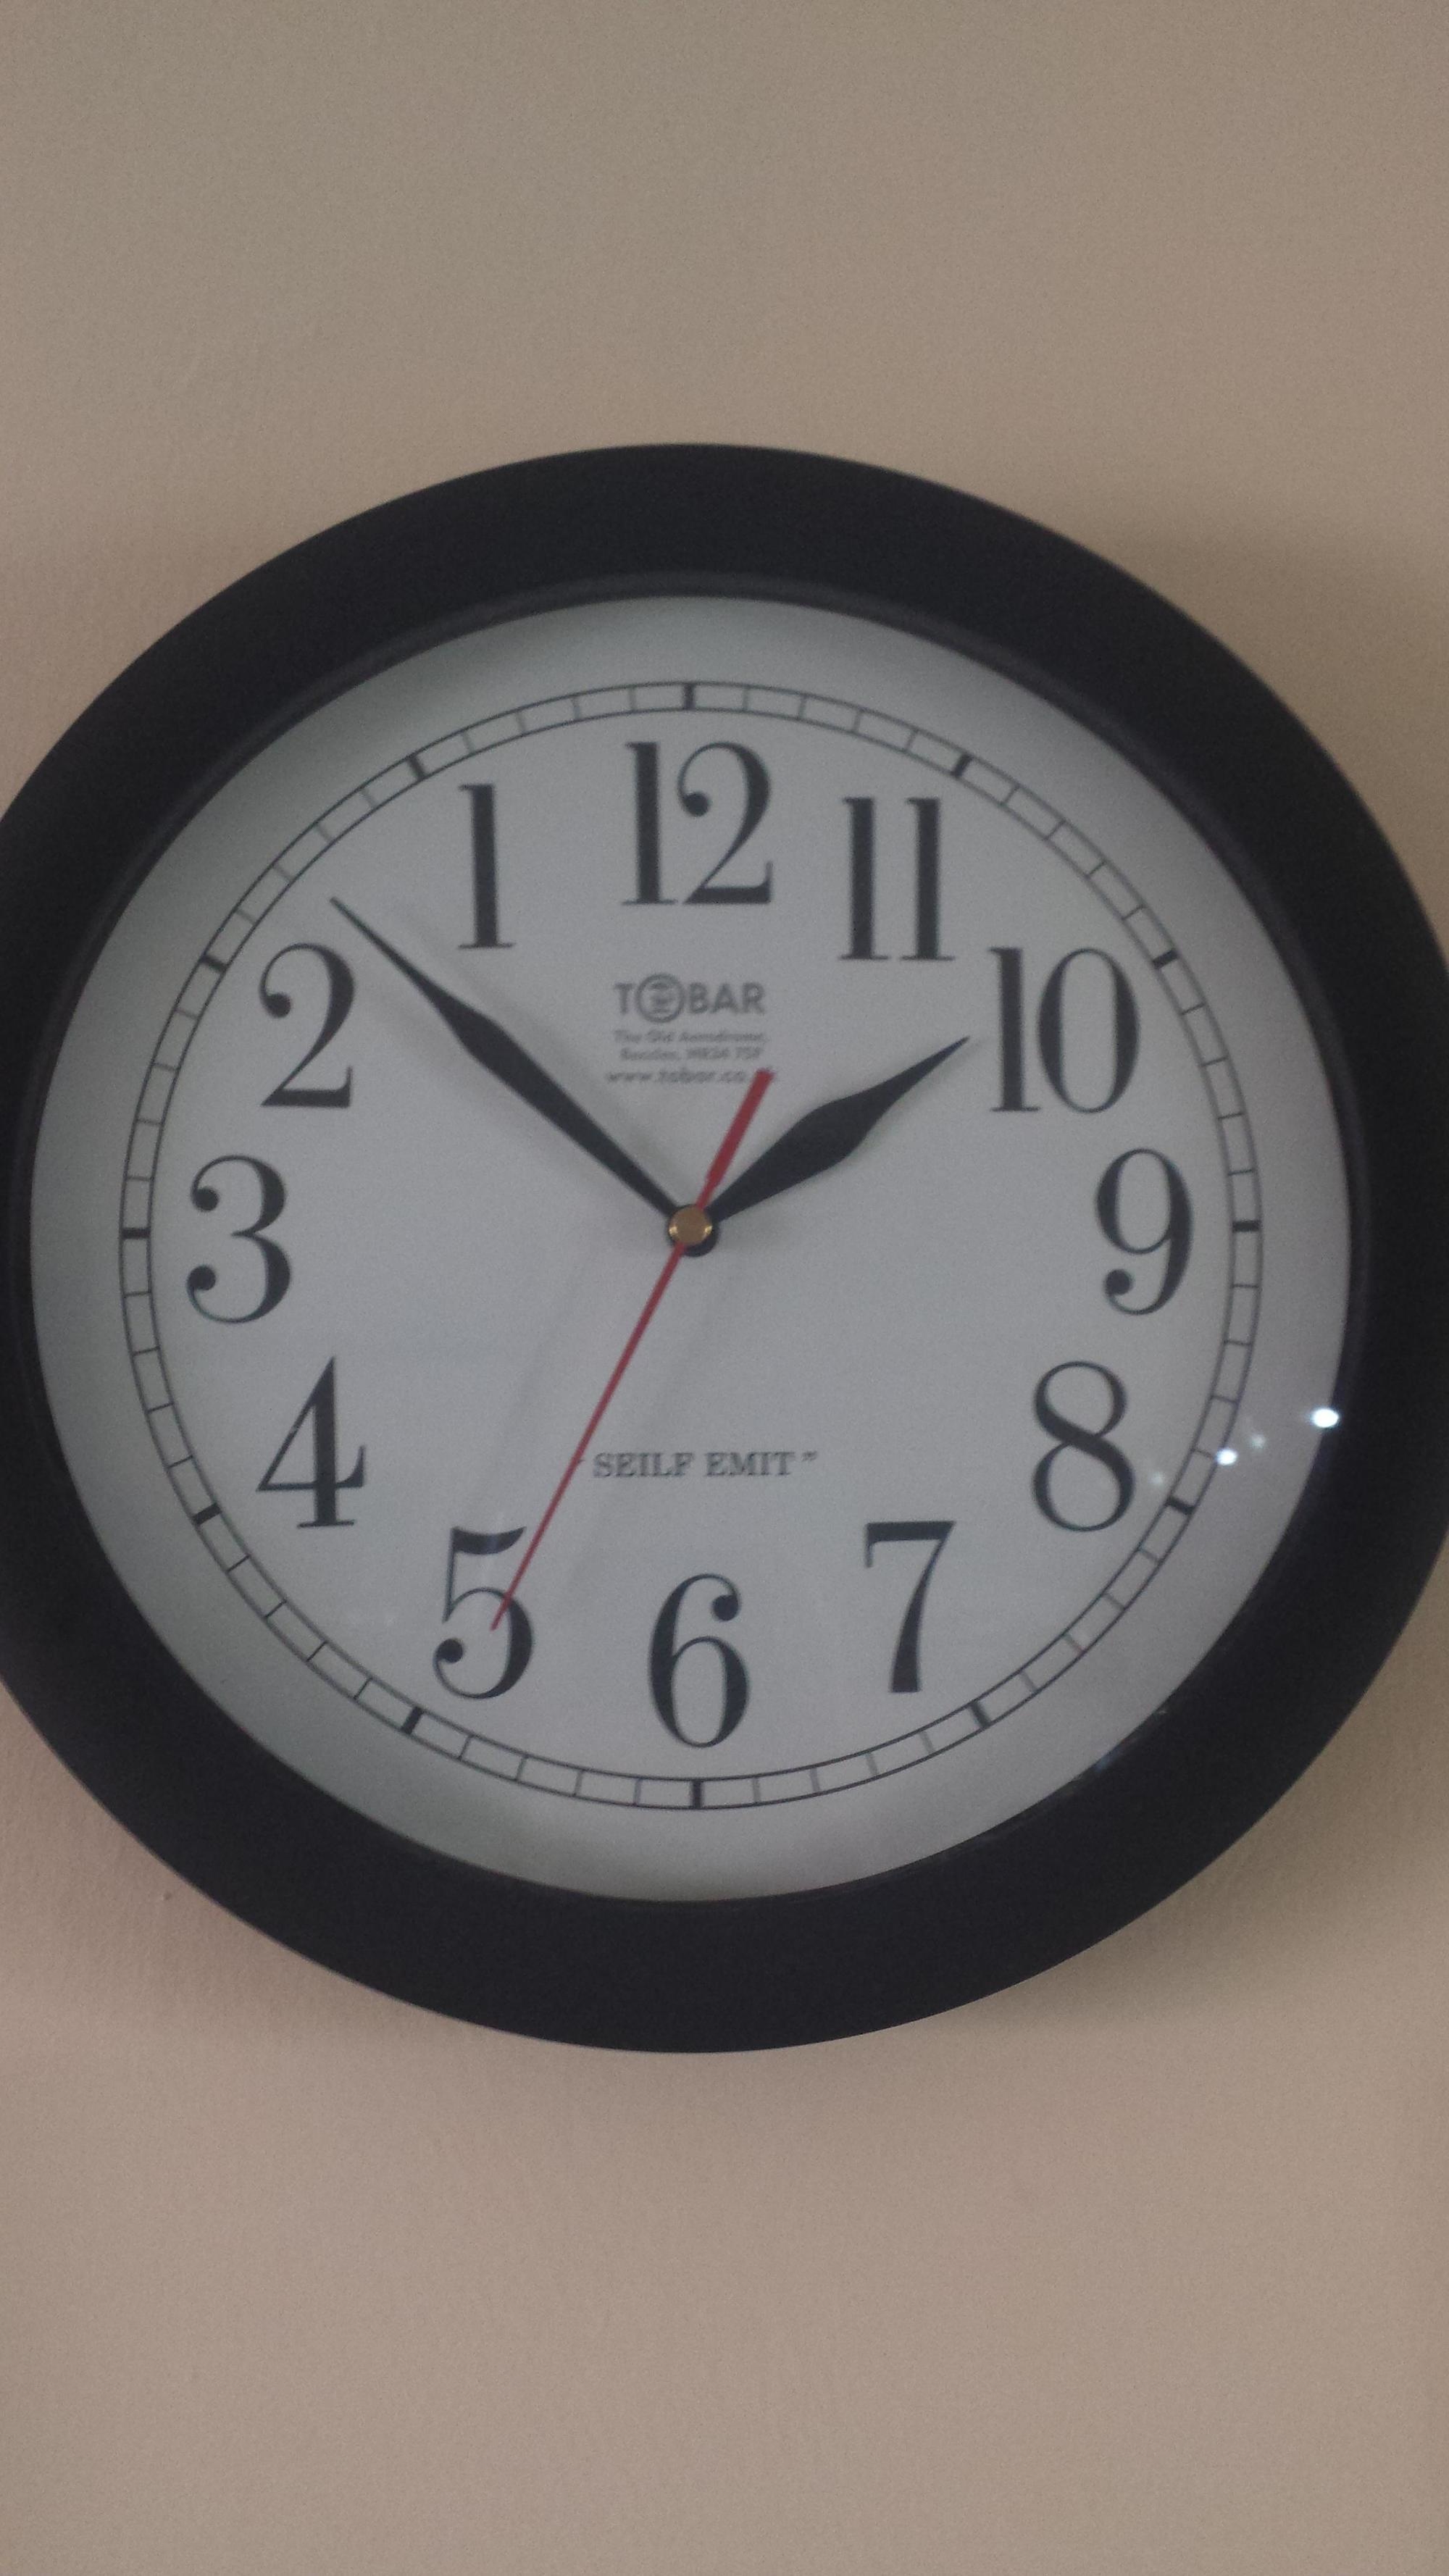 This clock proves that you can go back in time.